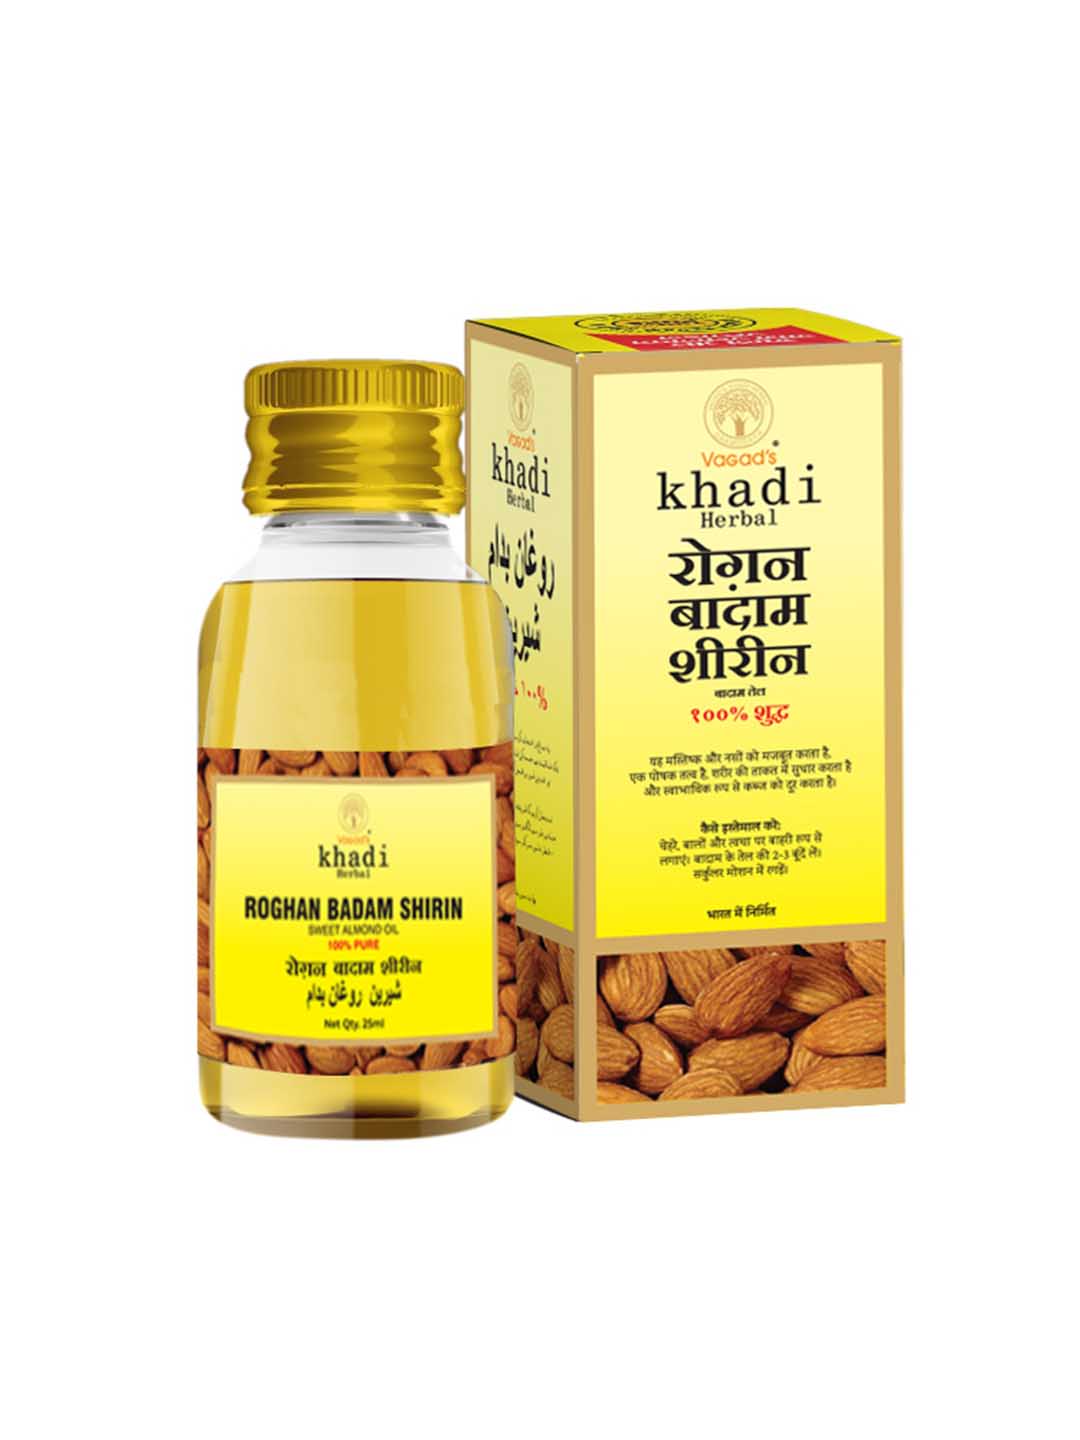 5 AMAZING Benefits of Roghan badam almond oil for skin care  beauty   YouTube